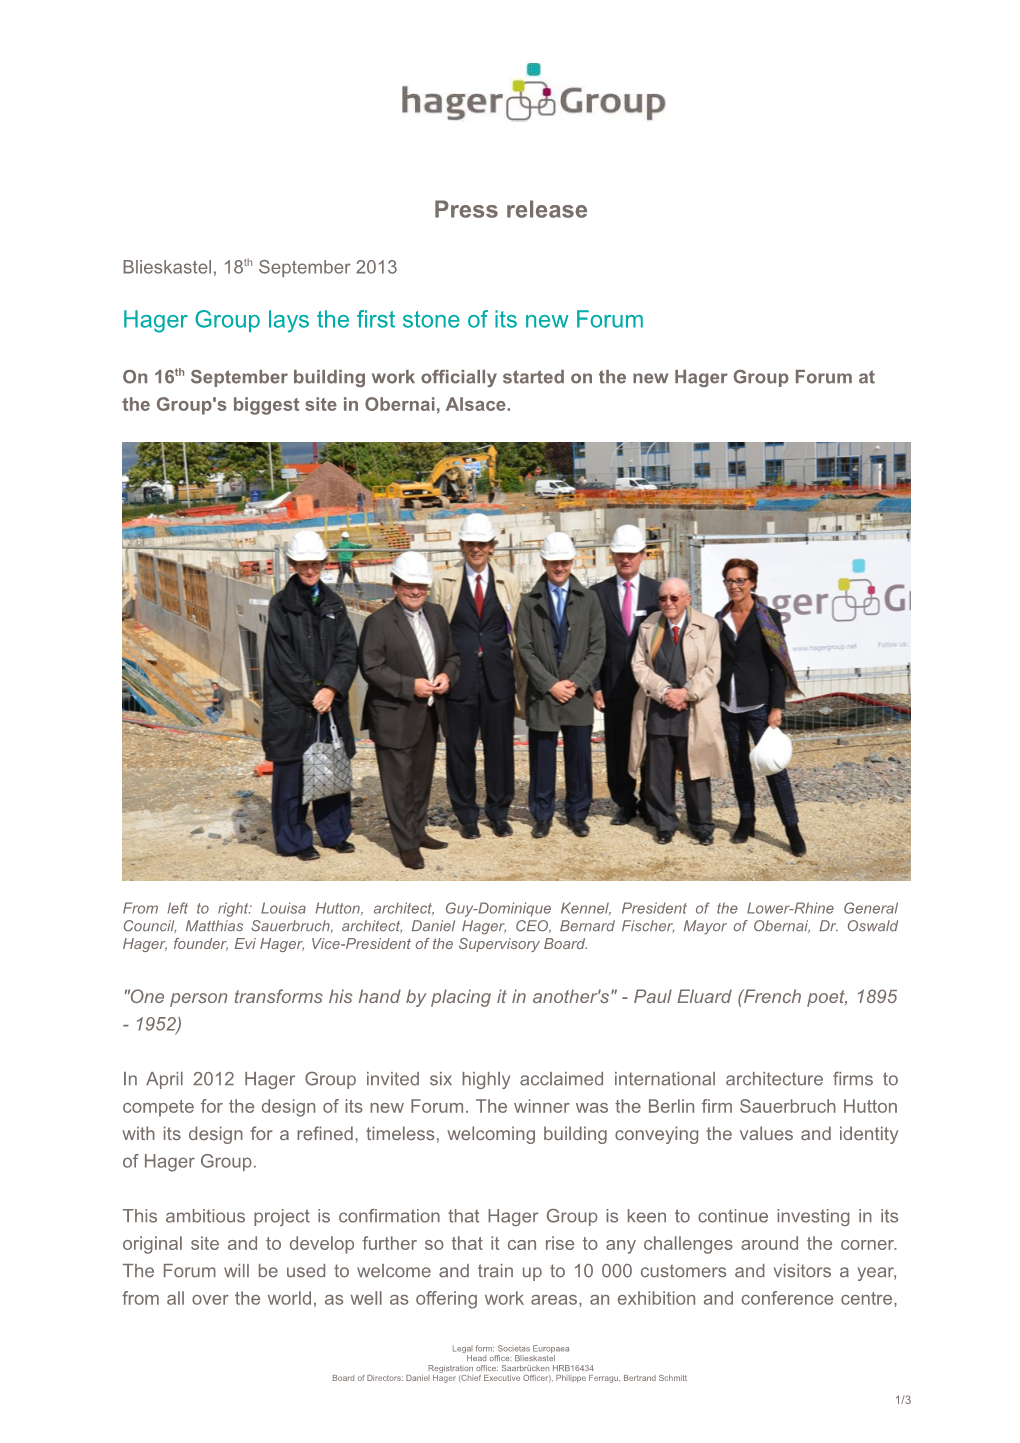 Hager Group Lays the First Stone of Its New Forum